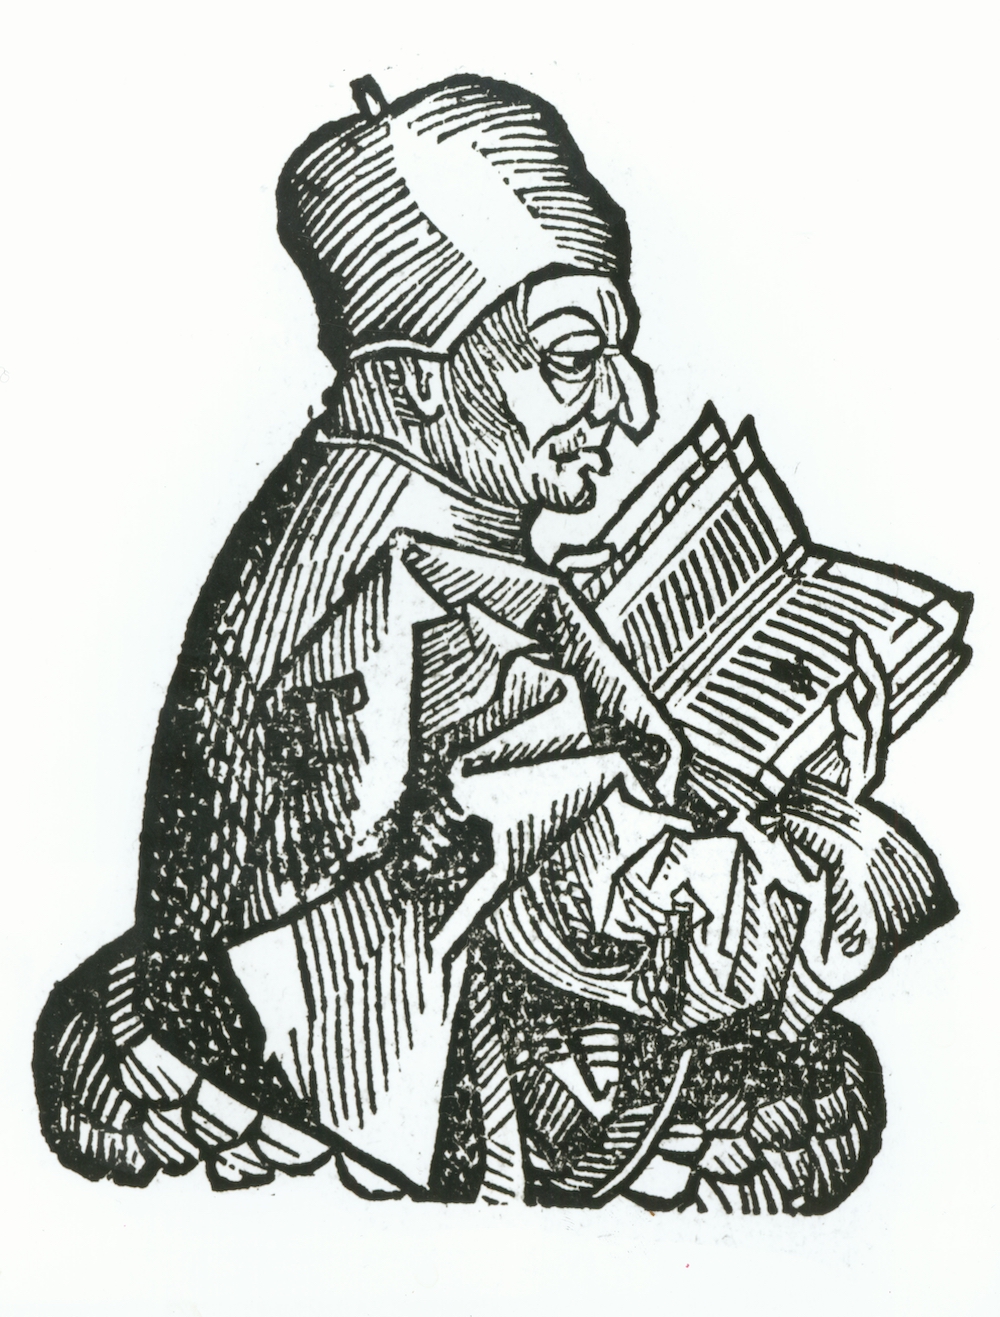 Bede, from Liber Chronicarum, by Hartmann Schedel, woodcut, 1493.